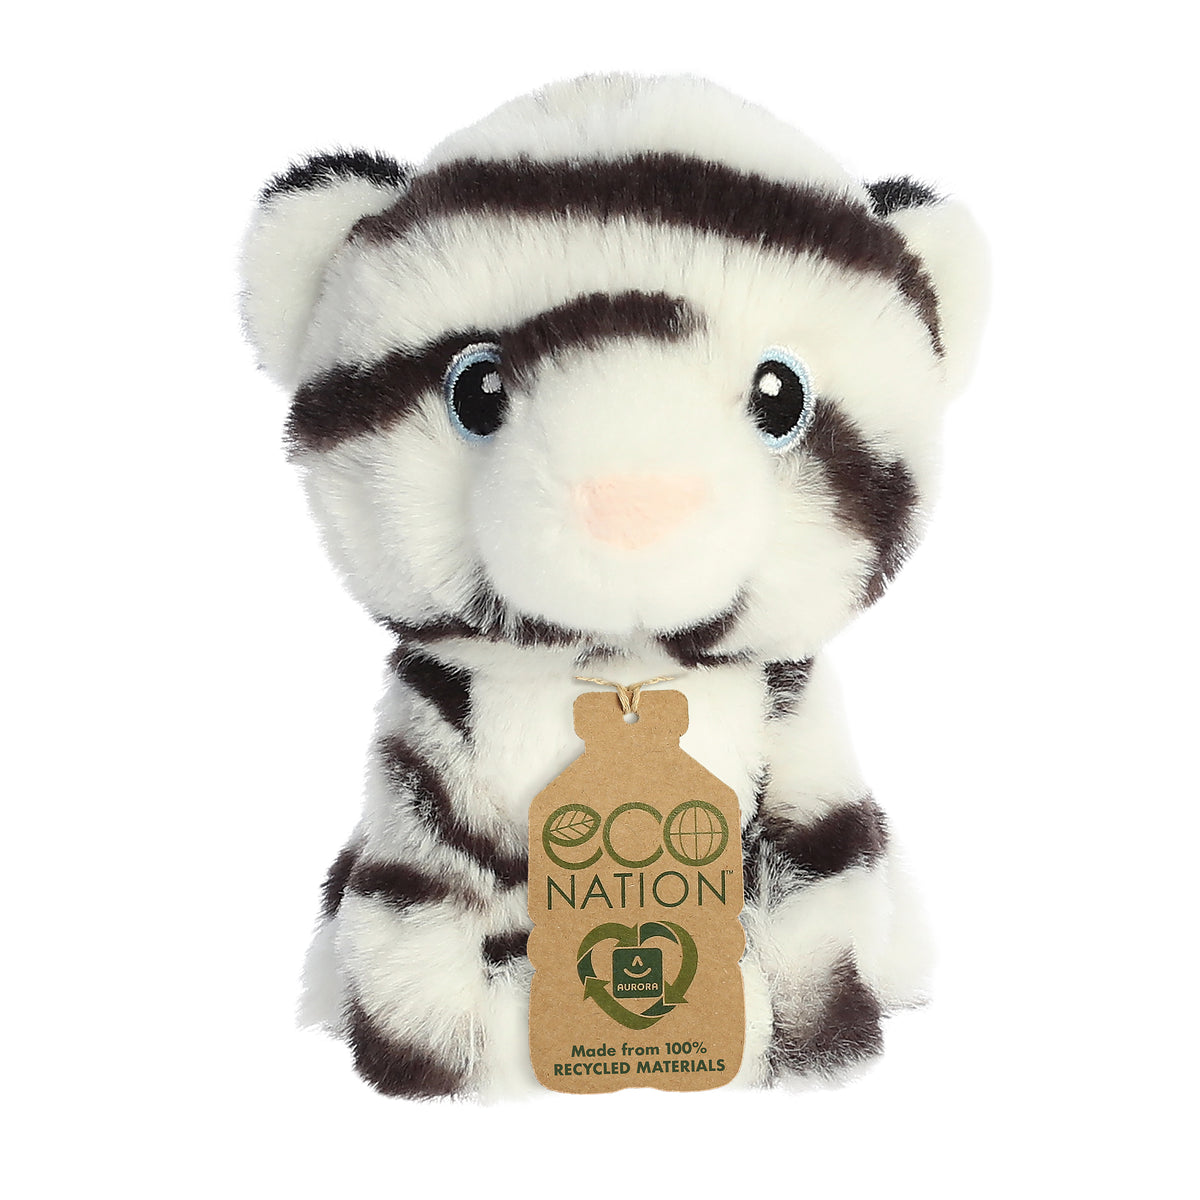 A lovable white tiger plush with white and black stripes on its coat and an eco-nation tag around its neck.